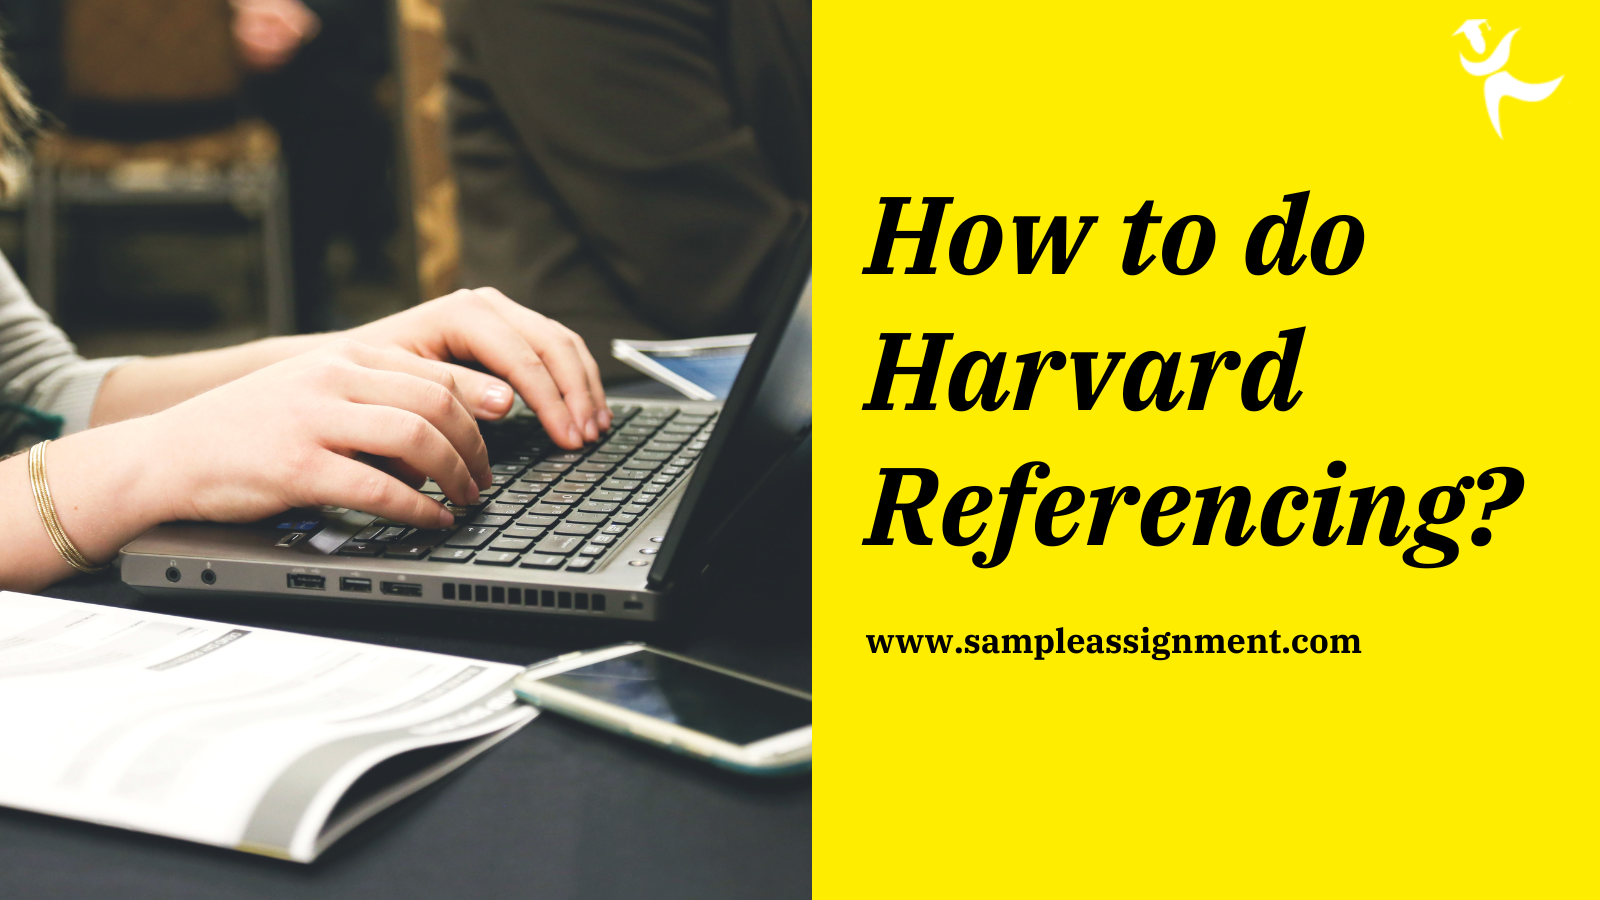 How to do Harvard Referencing